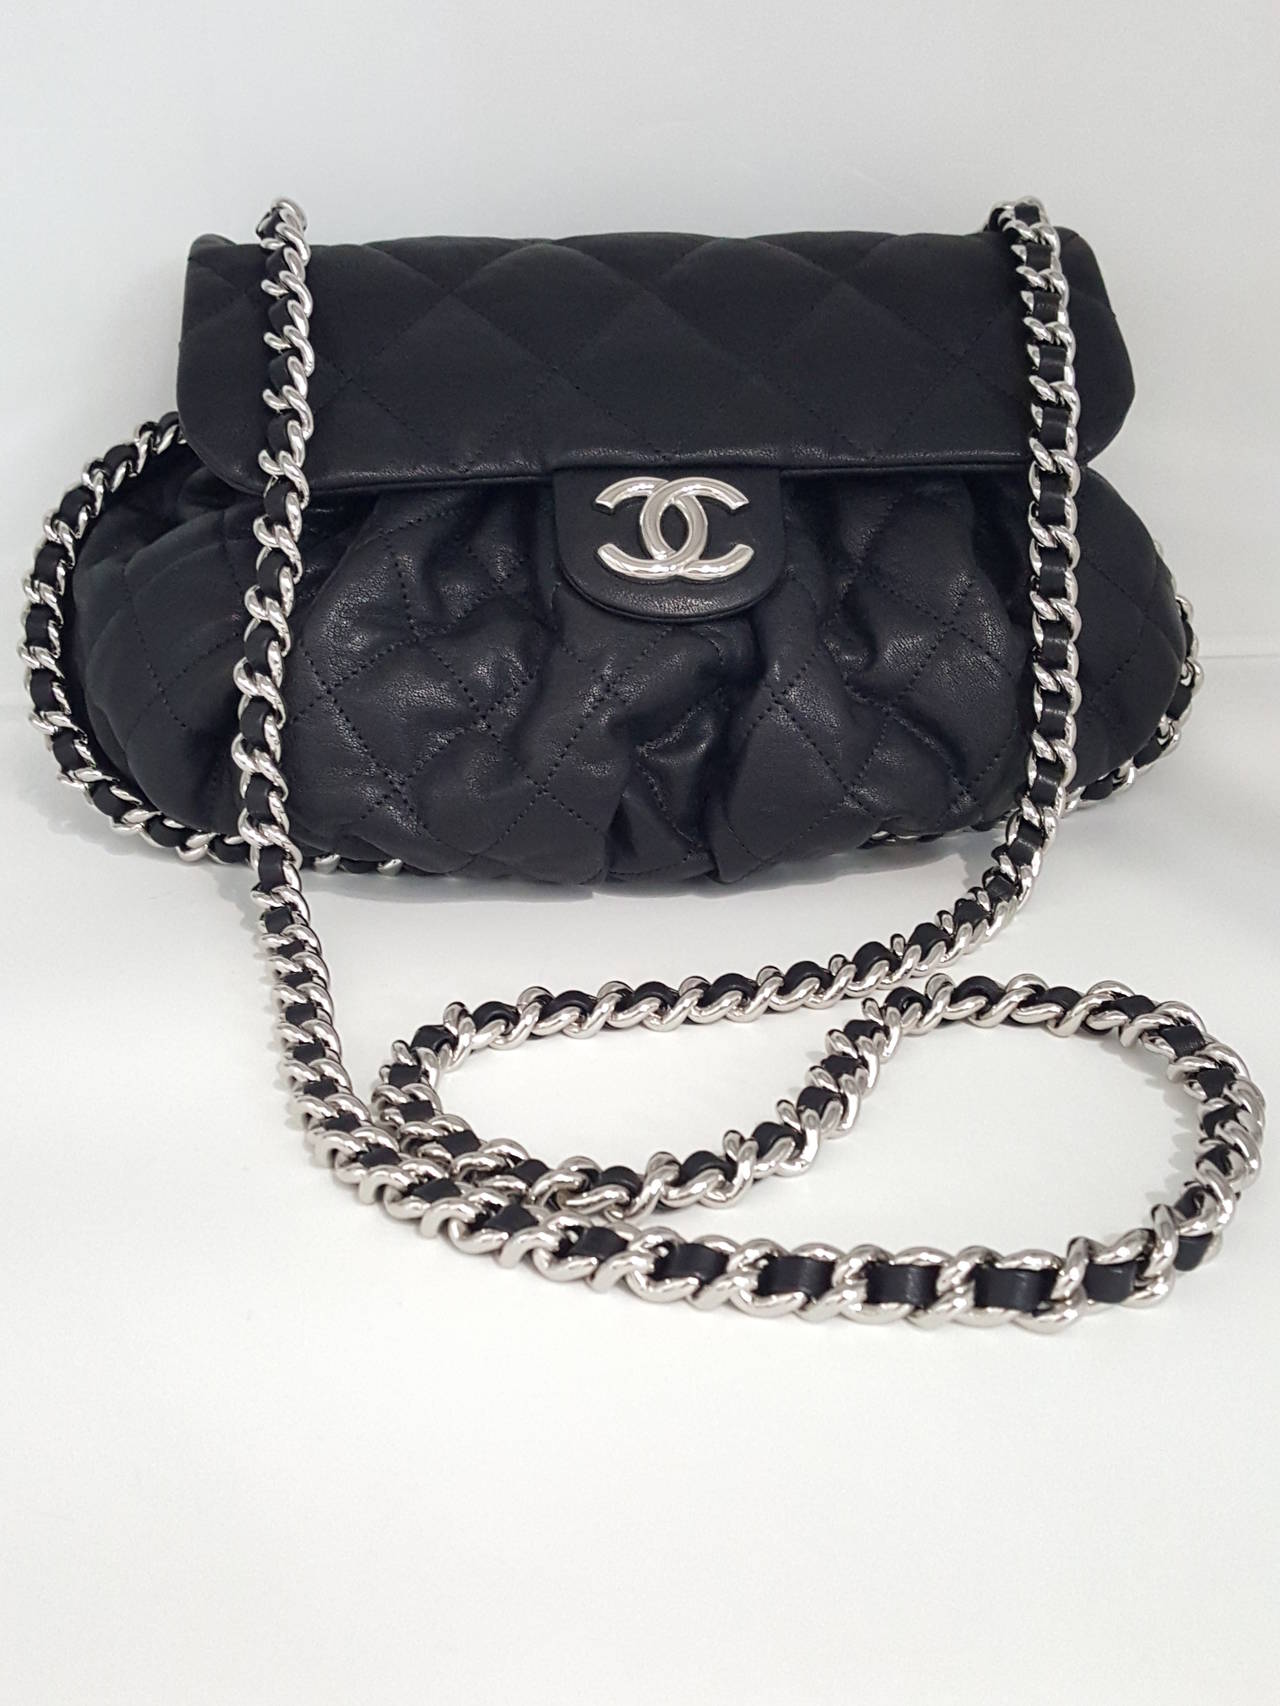 Offered for sale is this highly sought after CHANEL Medium Chain Around cross body/ messenger bag from 2015 in black aged lambskin. NWOT  This bag has silver hardware and a tan grosgrain interior with one zippered compartment.  There is a hidden